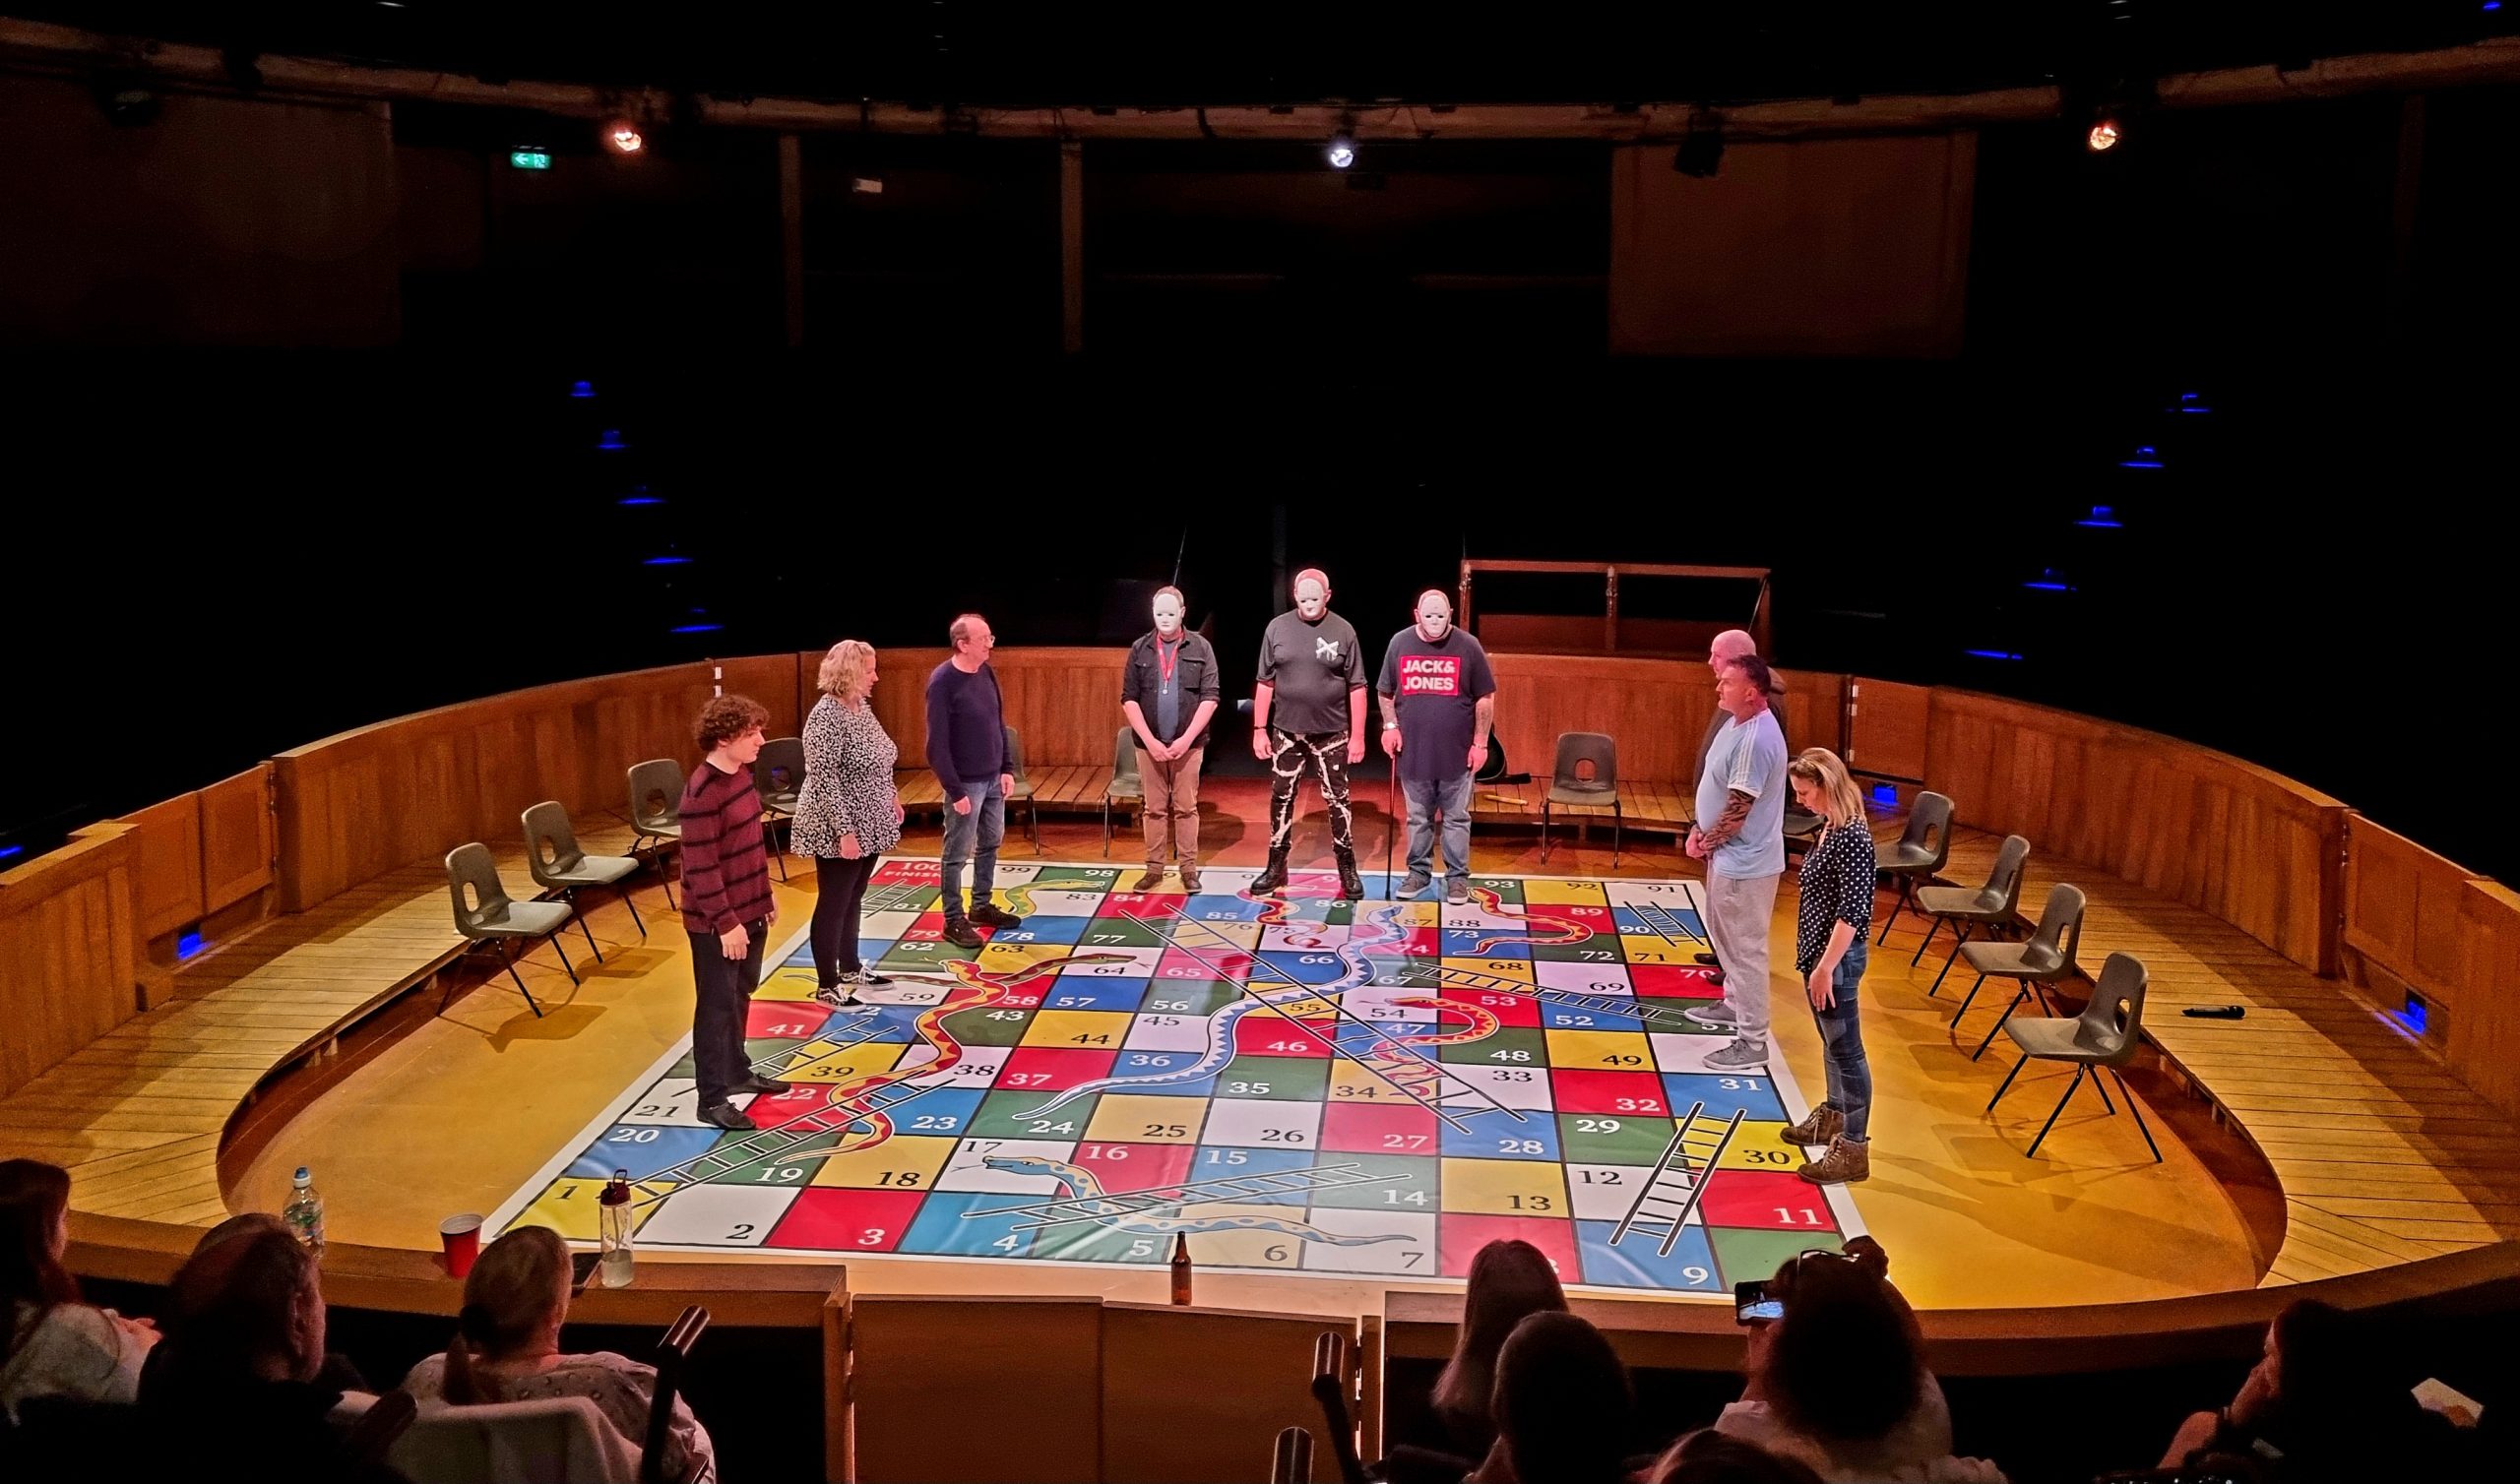 The Next Chapter drama group perform on the New Vic Theatre stage for World Mental Health Day 2023. They are stood along the edge of a snakes and ladders games board, three of the performers facing the audience wear masks.